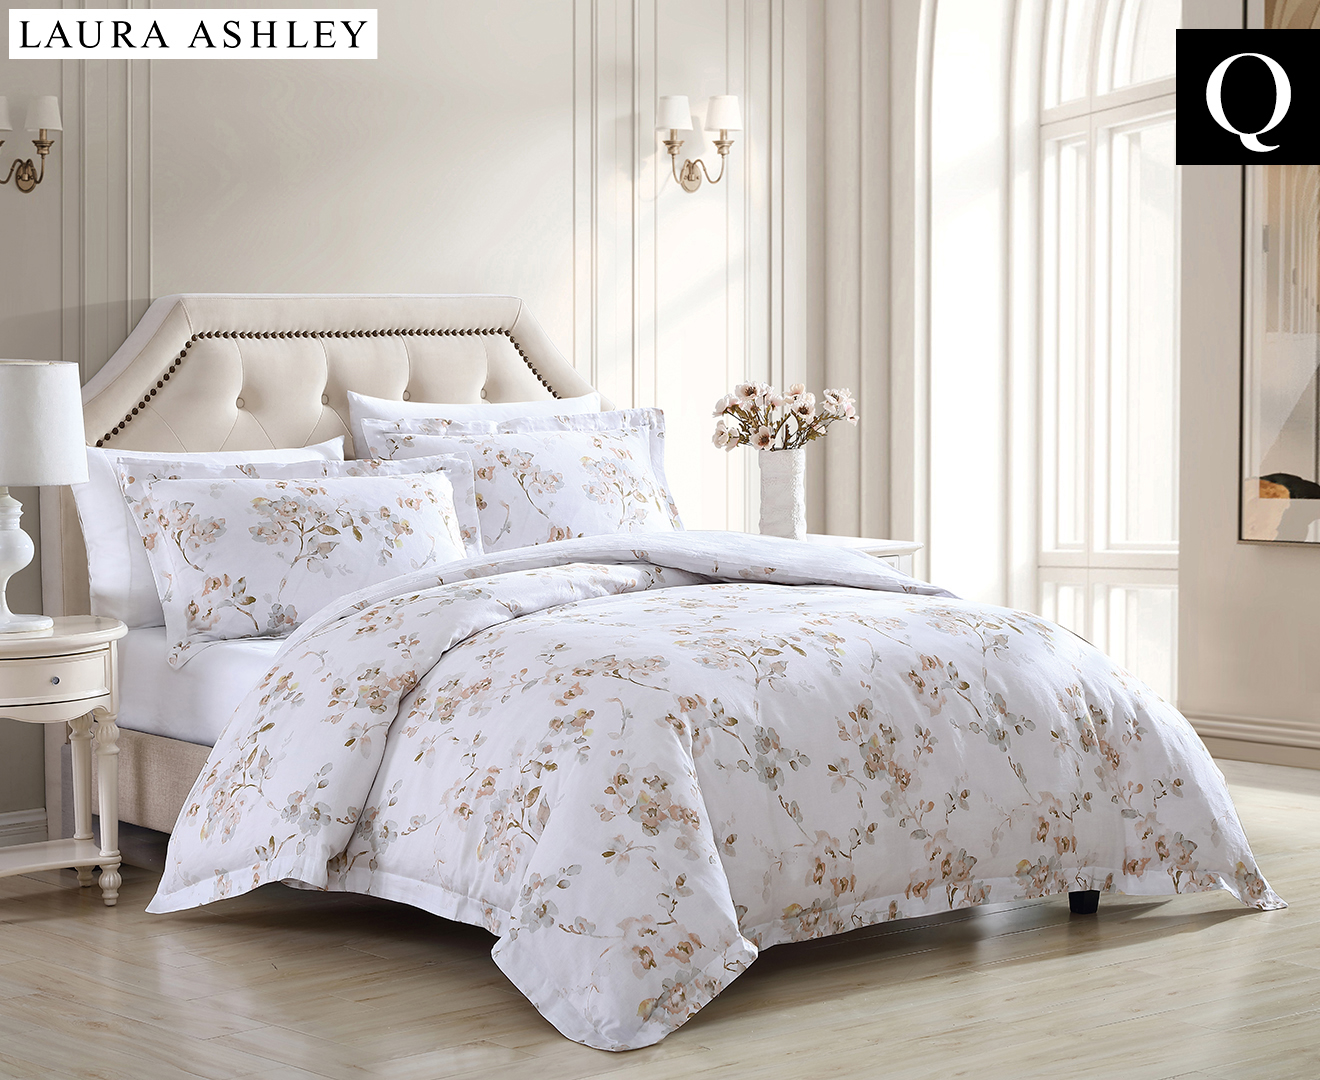 Laura Ashley Lorene Queen Bed Quilt Cover Set - Natural | Catch.co.nz